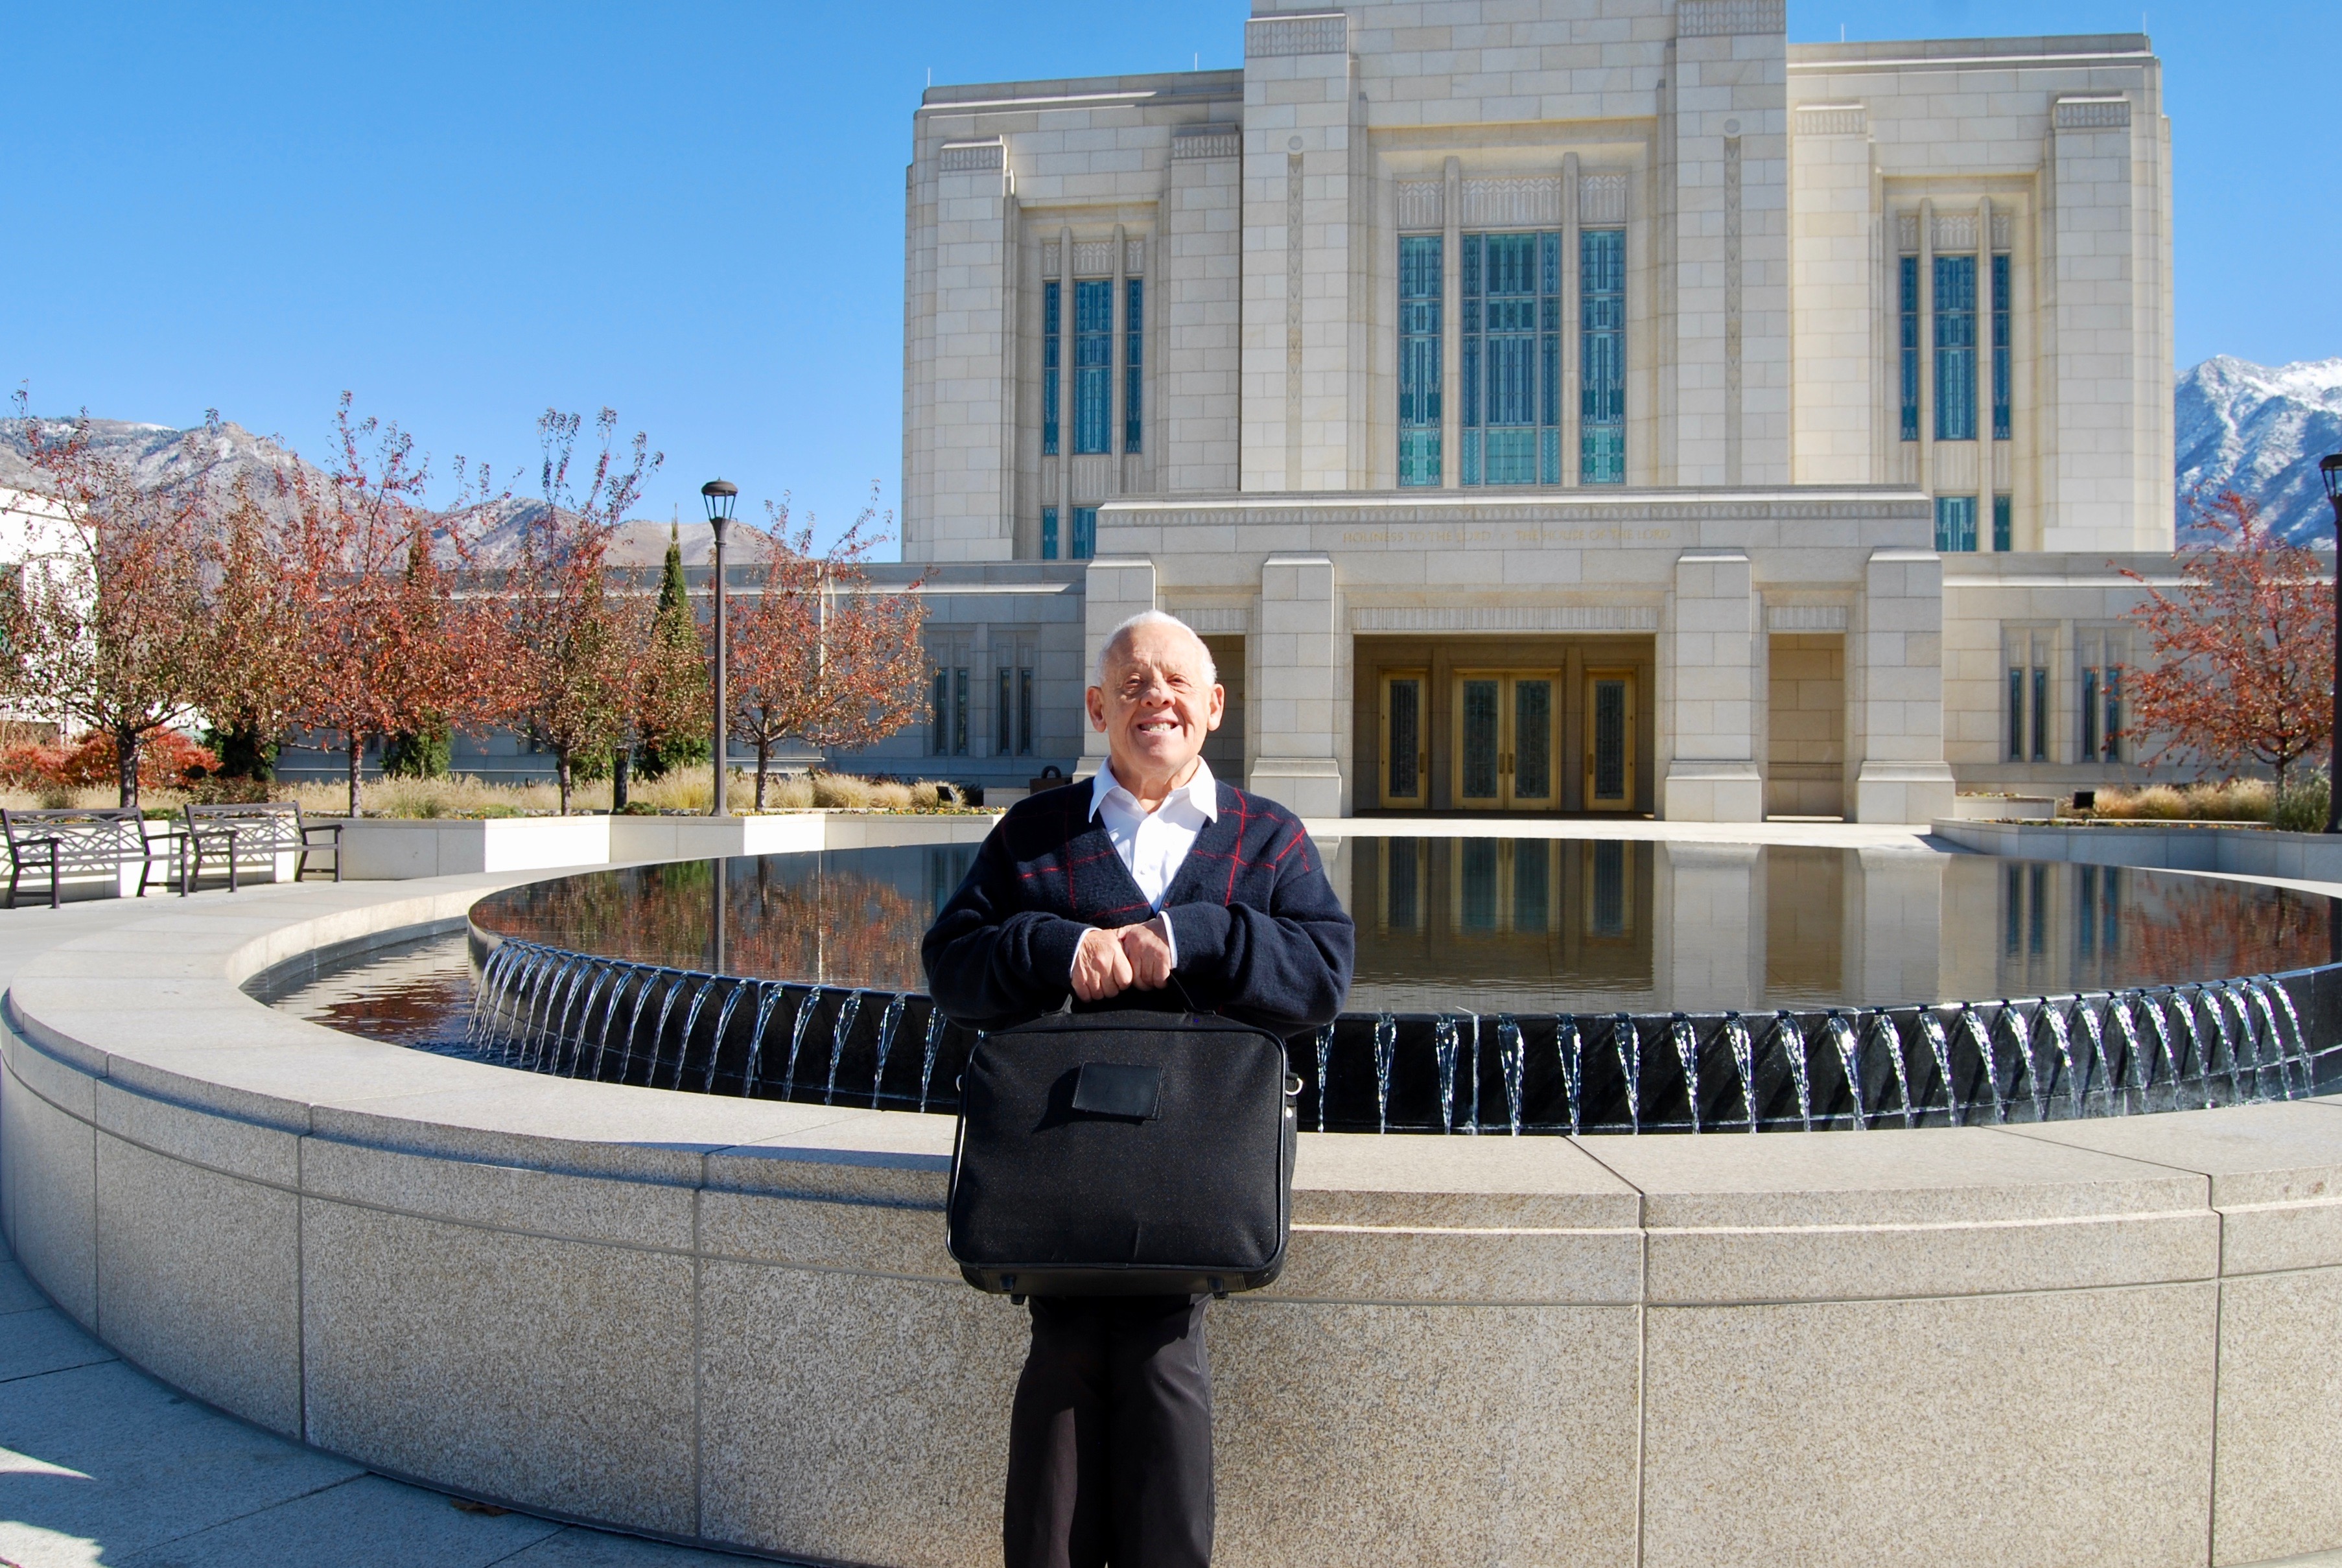 Dennis Preece sits outside the Ogden Utah Temple after attending his daily endowment sessions on Wednesday, Oct. 30, 2019.